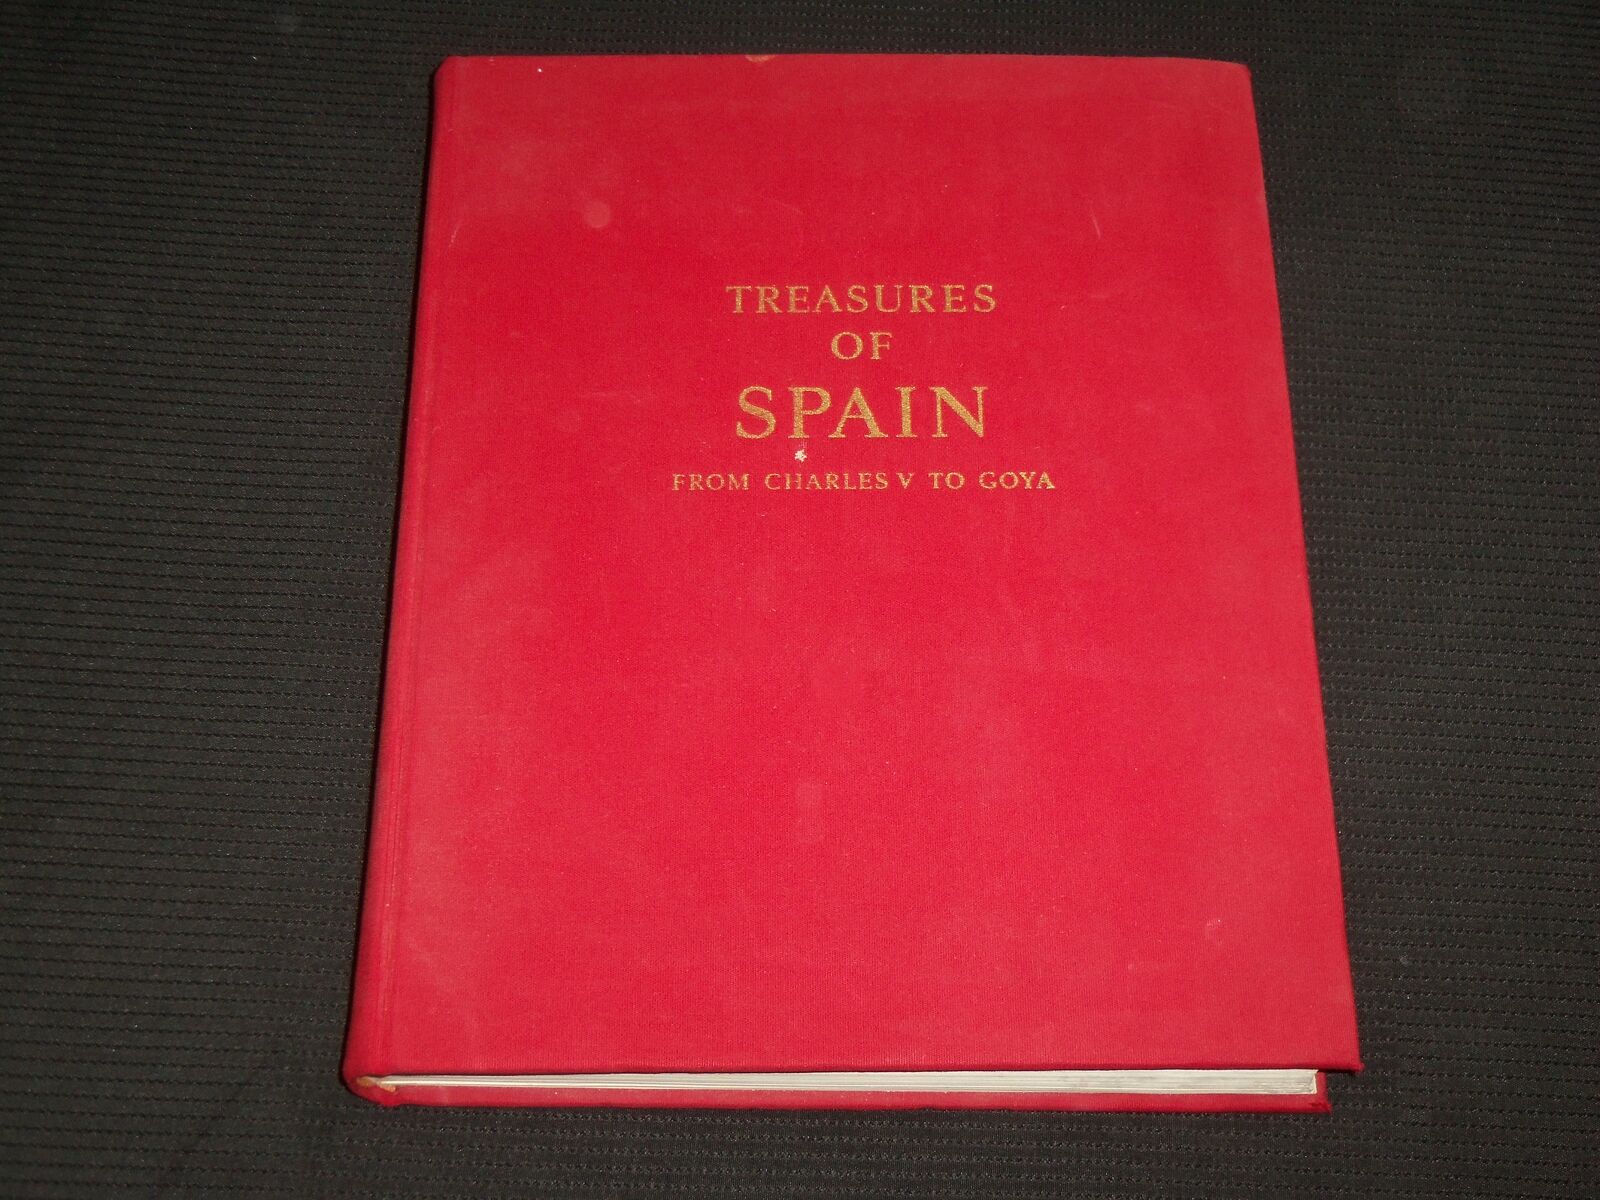 1965 TREASURES OF SPAIN HARDCOVER BOOK - FROM CHARLES TO GOYA - R 722G